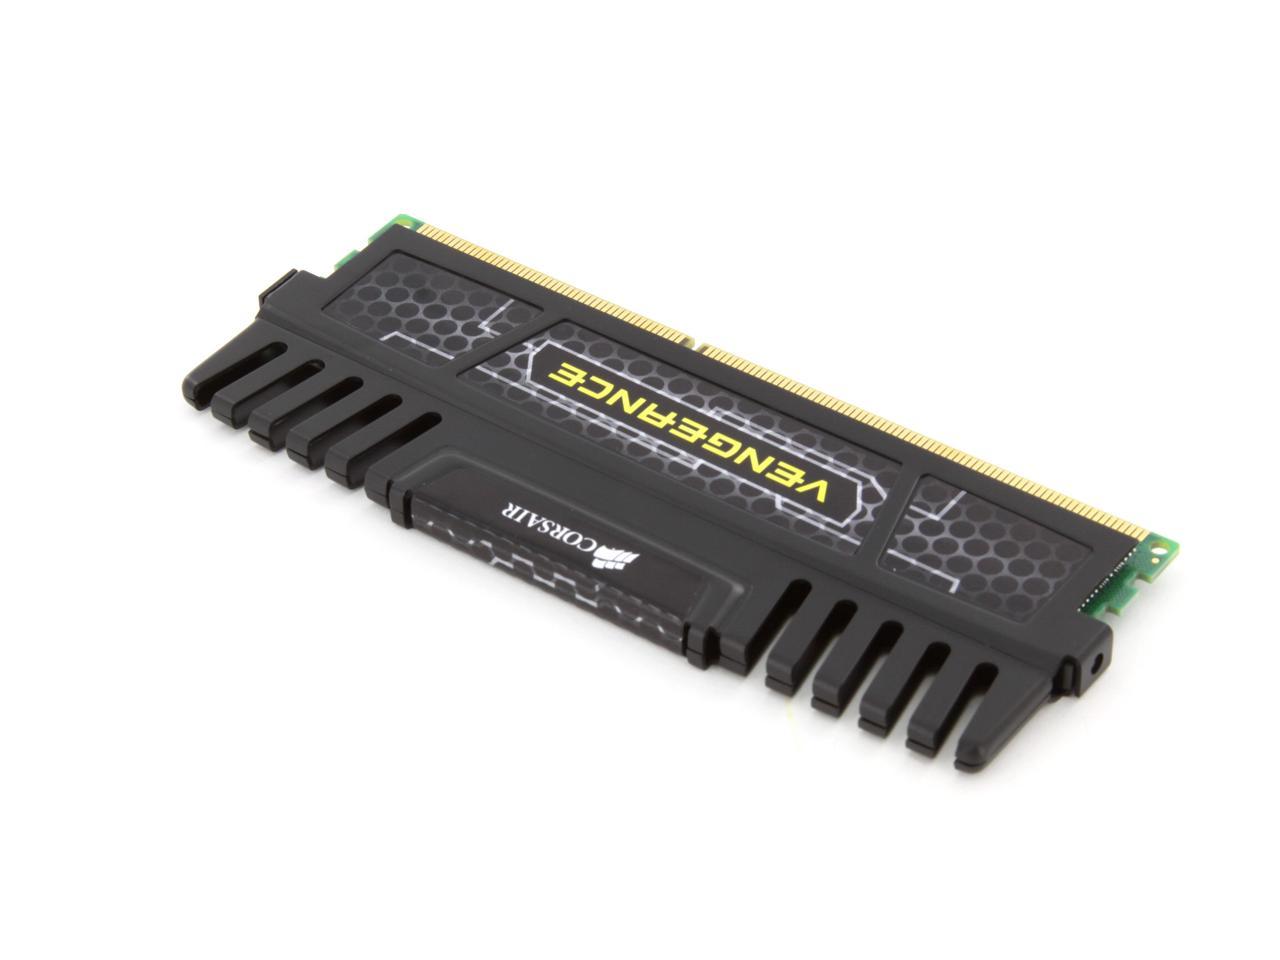 32GB 4x8GB PC3-12800 1600Mhz DDR3 240-PIN For AMD 990FX/990X/970 Chipset Memory 